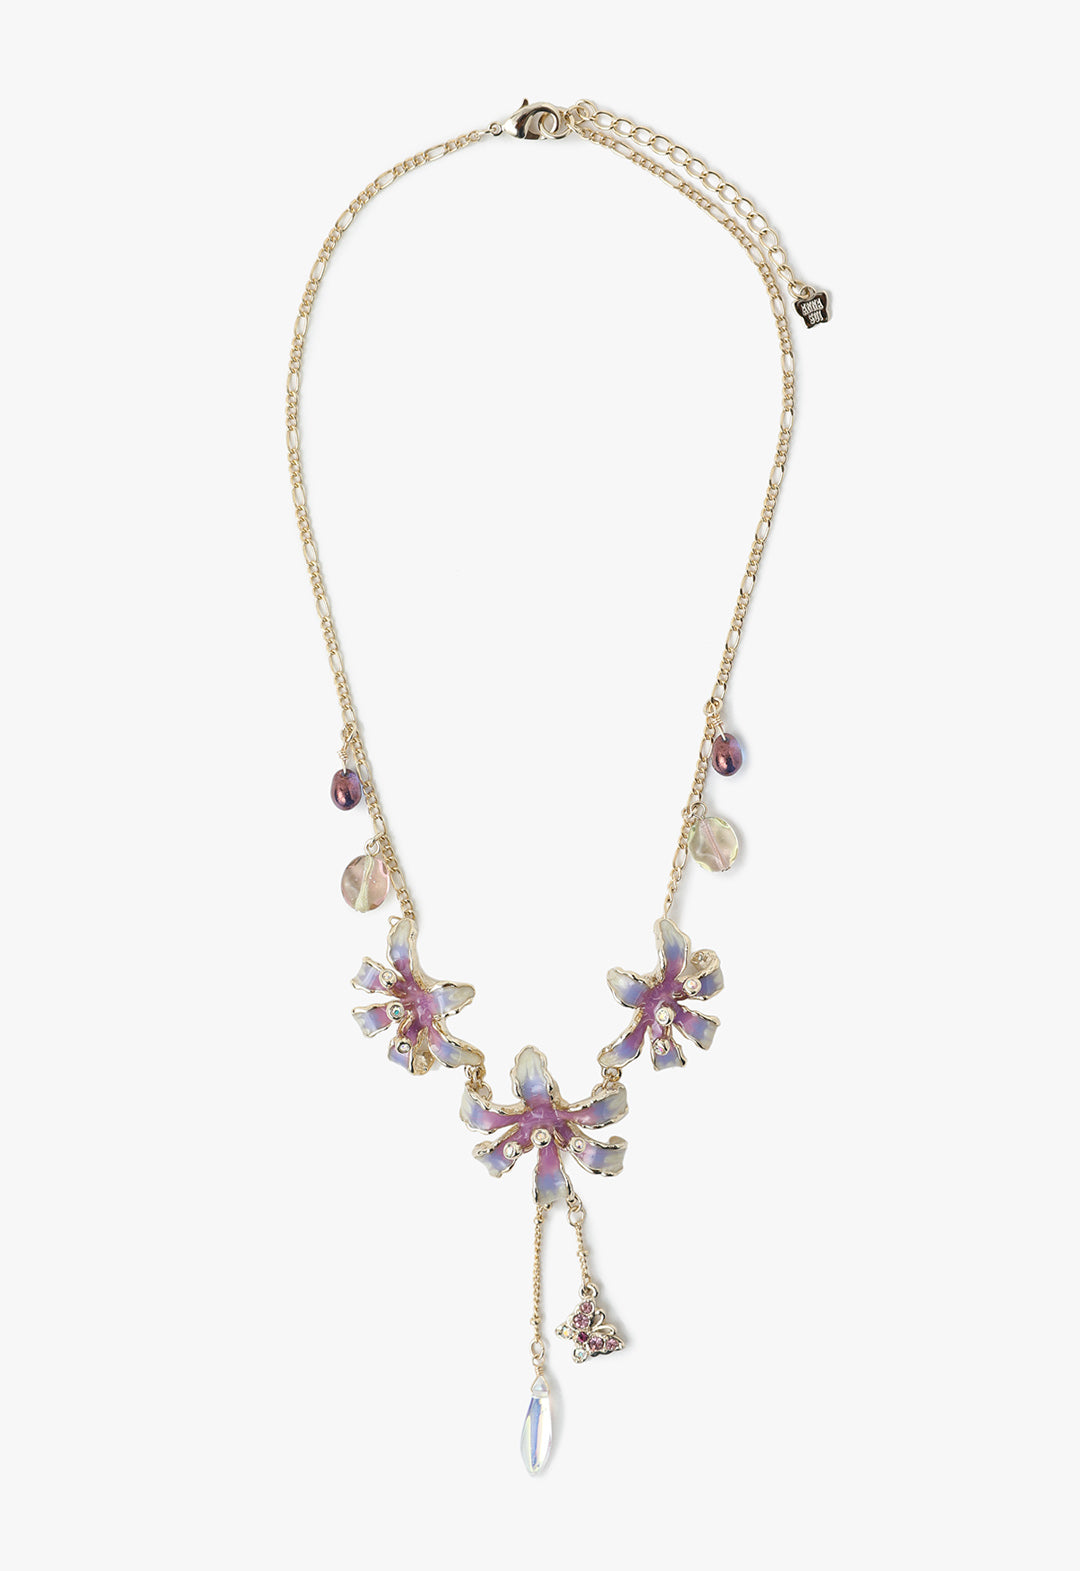 Floral Necklace, 3-large flowers, a butterfly down on a chain, chain with 4-purple glass stone 